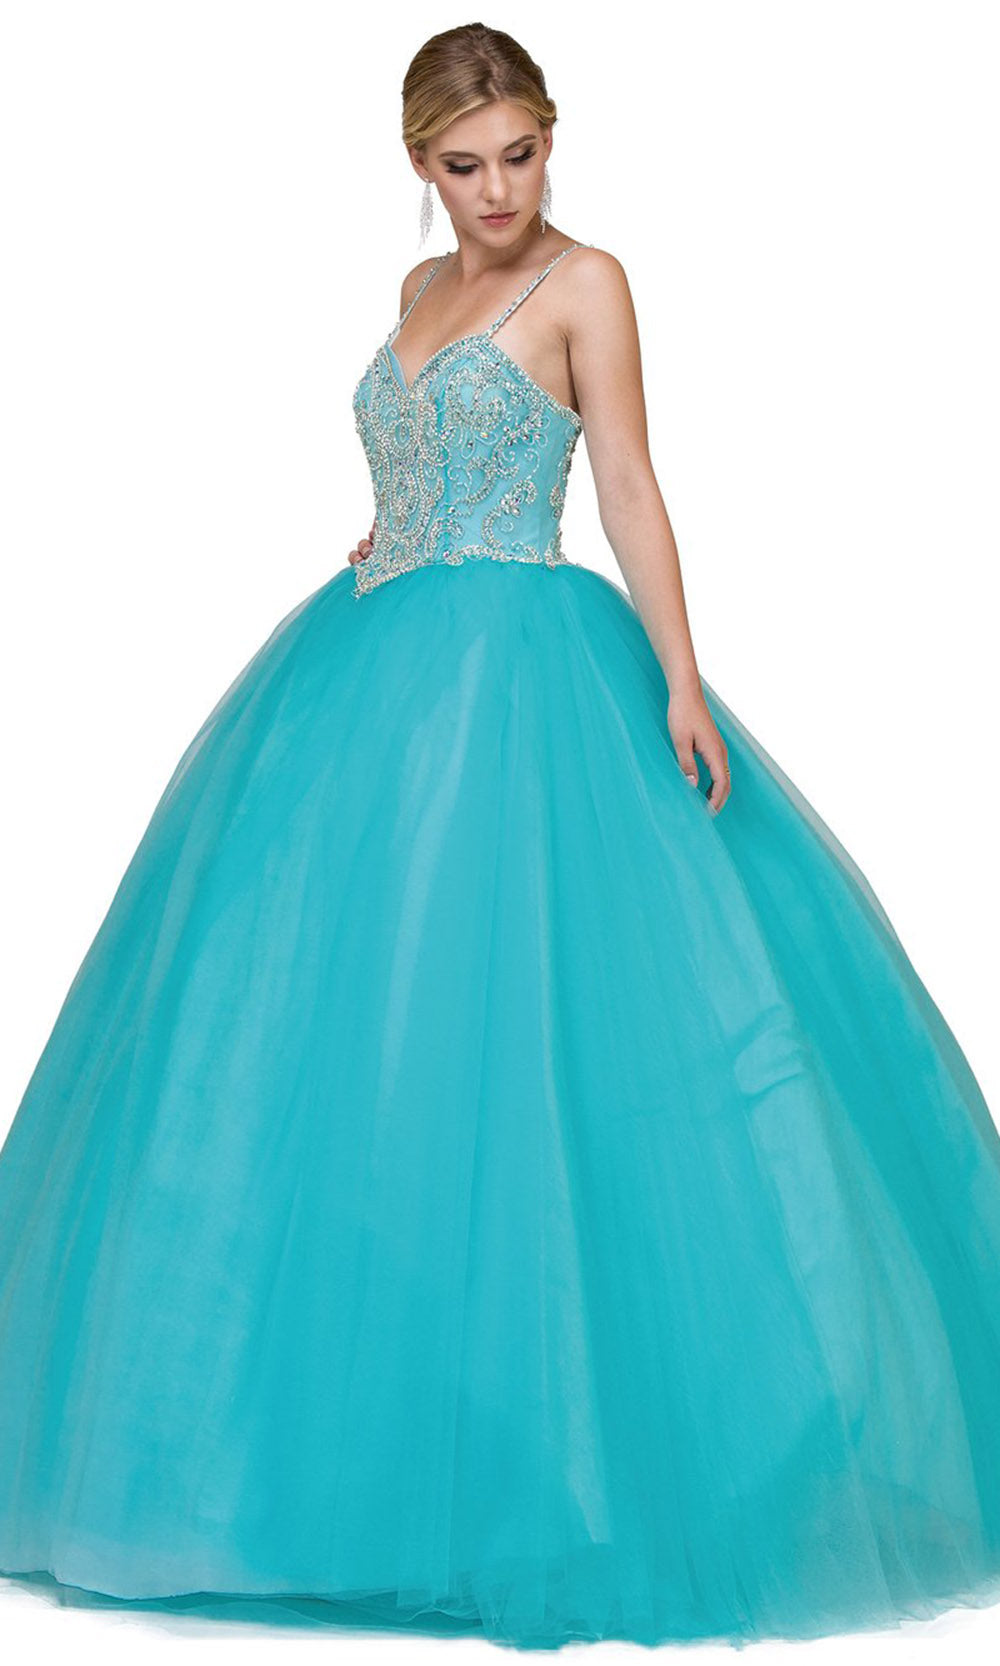 Dancing Queen - 1174 Jeweled Sweetheart Bodice Ballgown In Blue